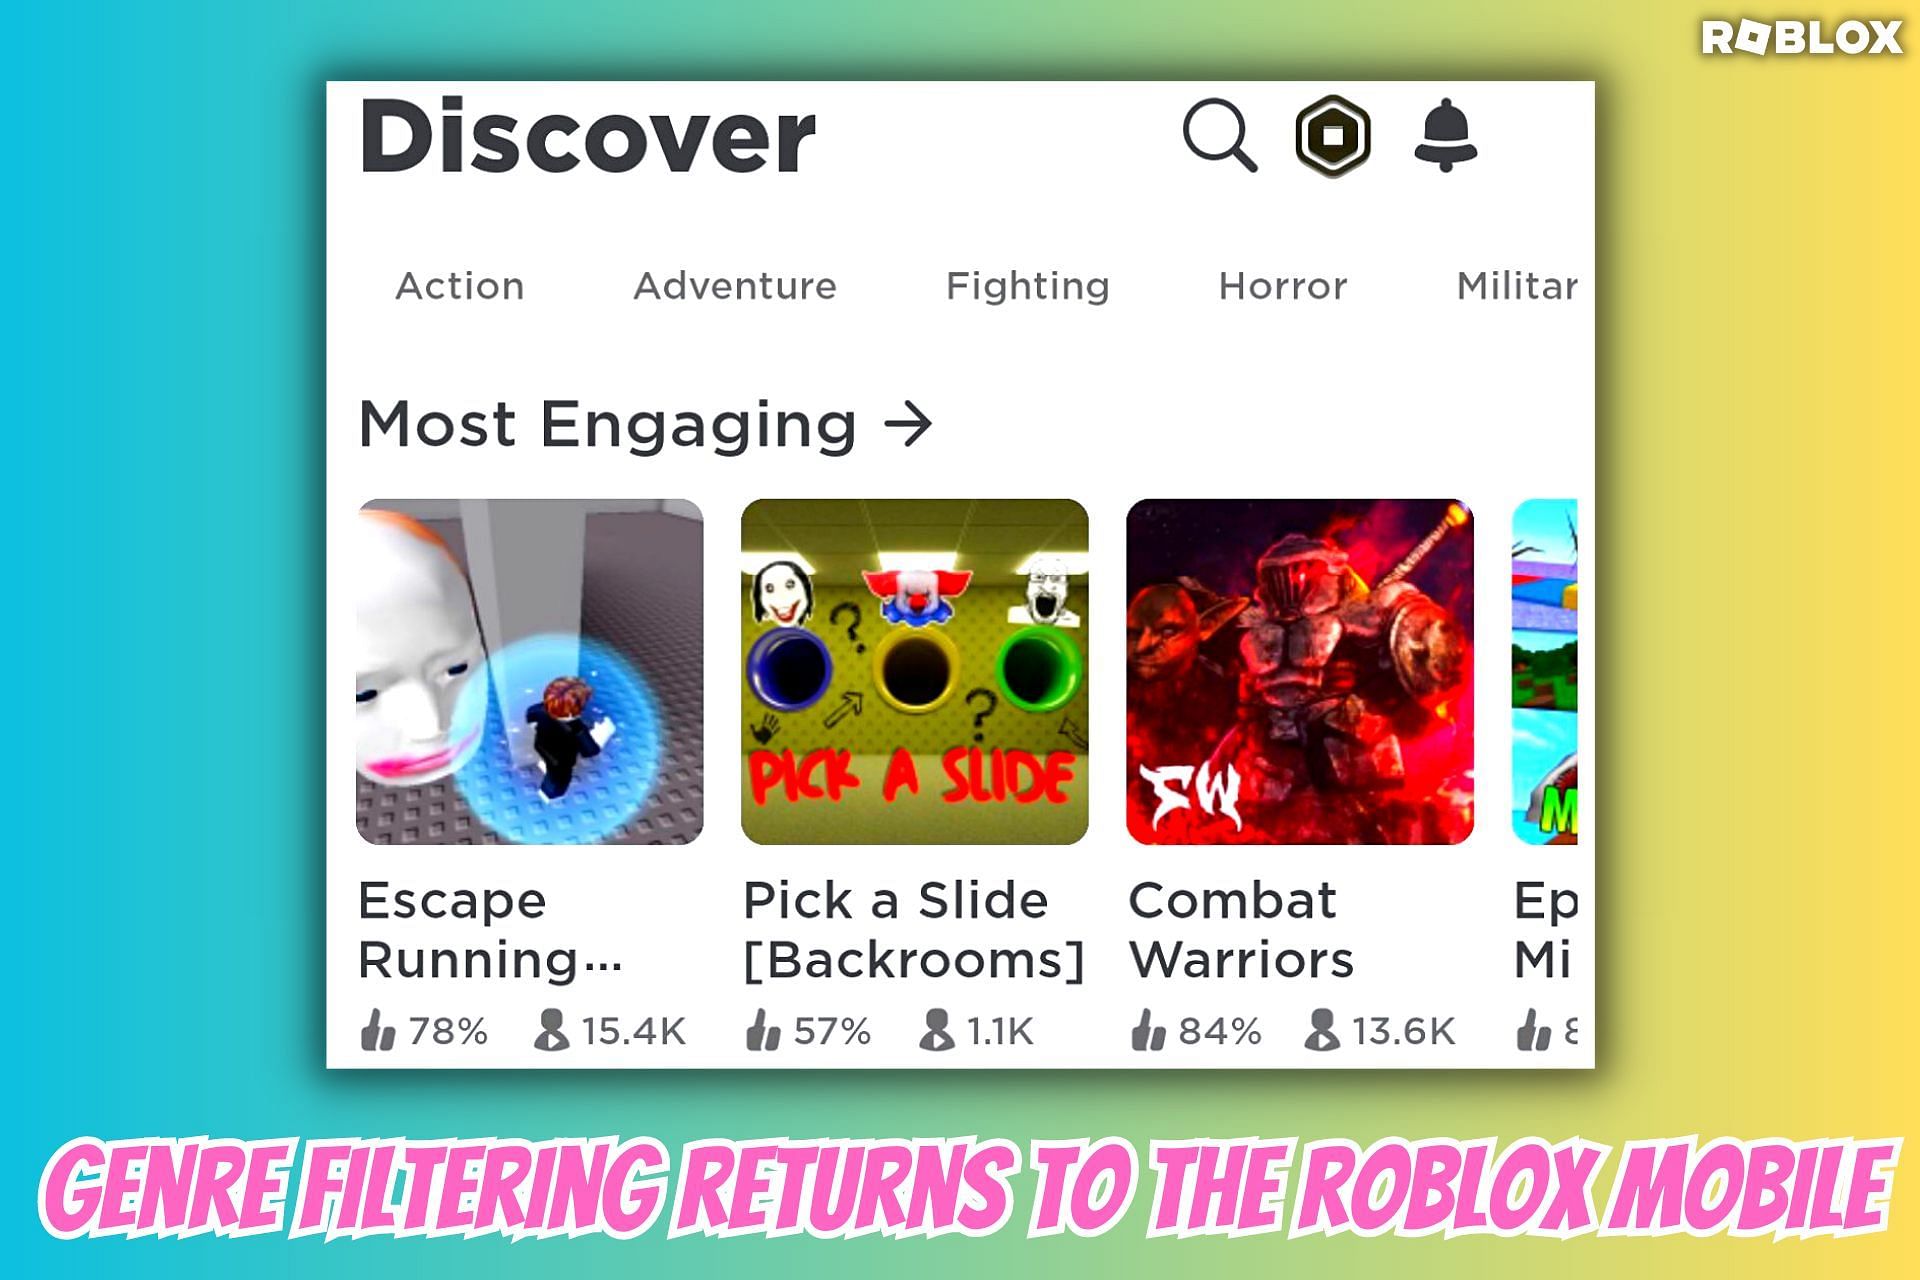 Searching for Roblox games by genre is coming back to the platform